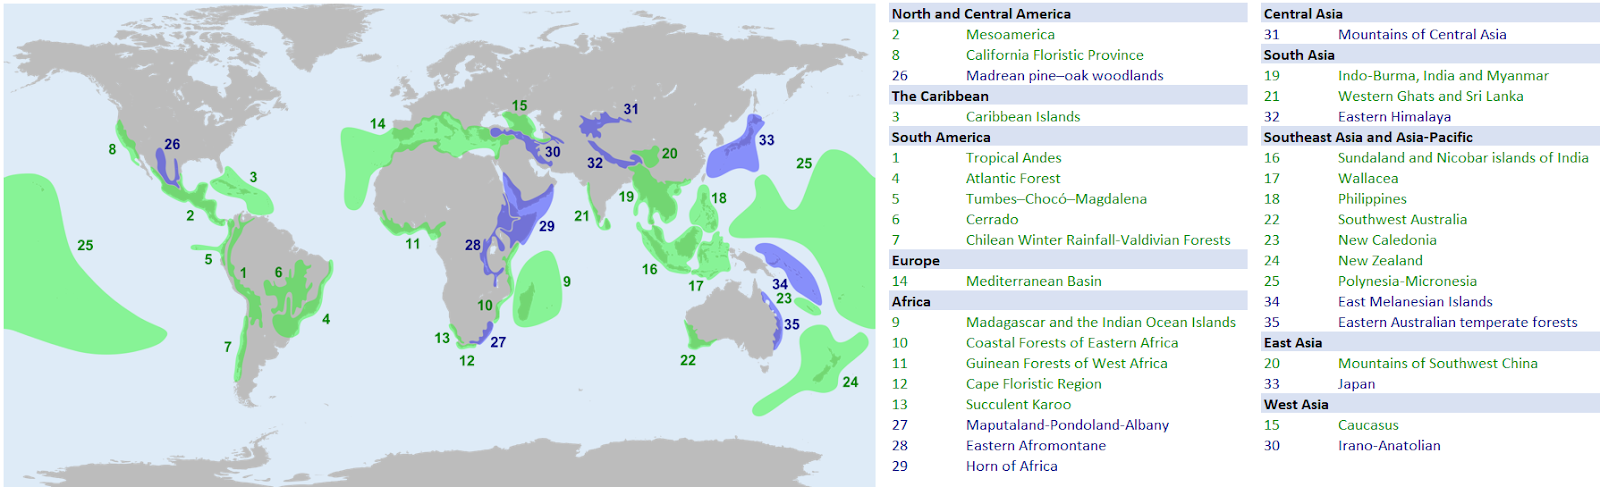 On the left is a world map labeled in green and purple with numbers. The right shows the name of the location that each of the numbers on the world map mark. The green locations are the original biodiversity hotspots and the purple are added regions. There are currently 35 total hotspots. 